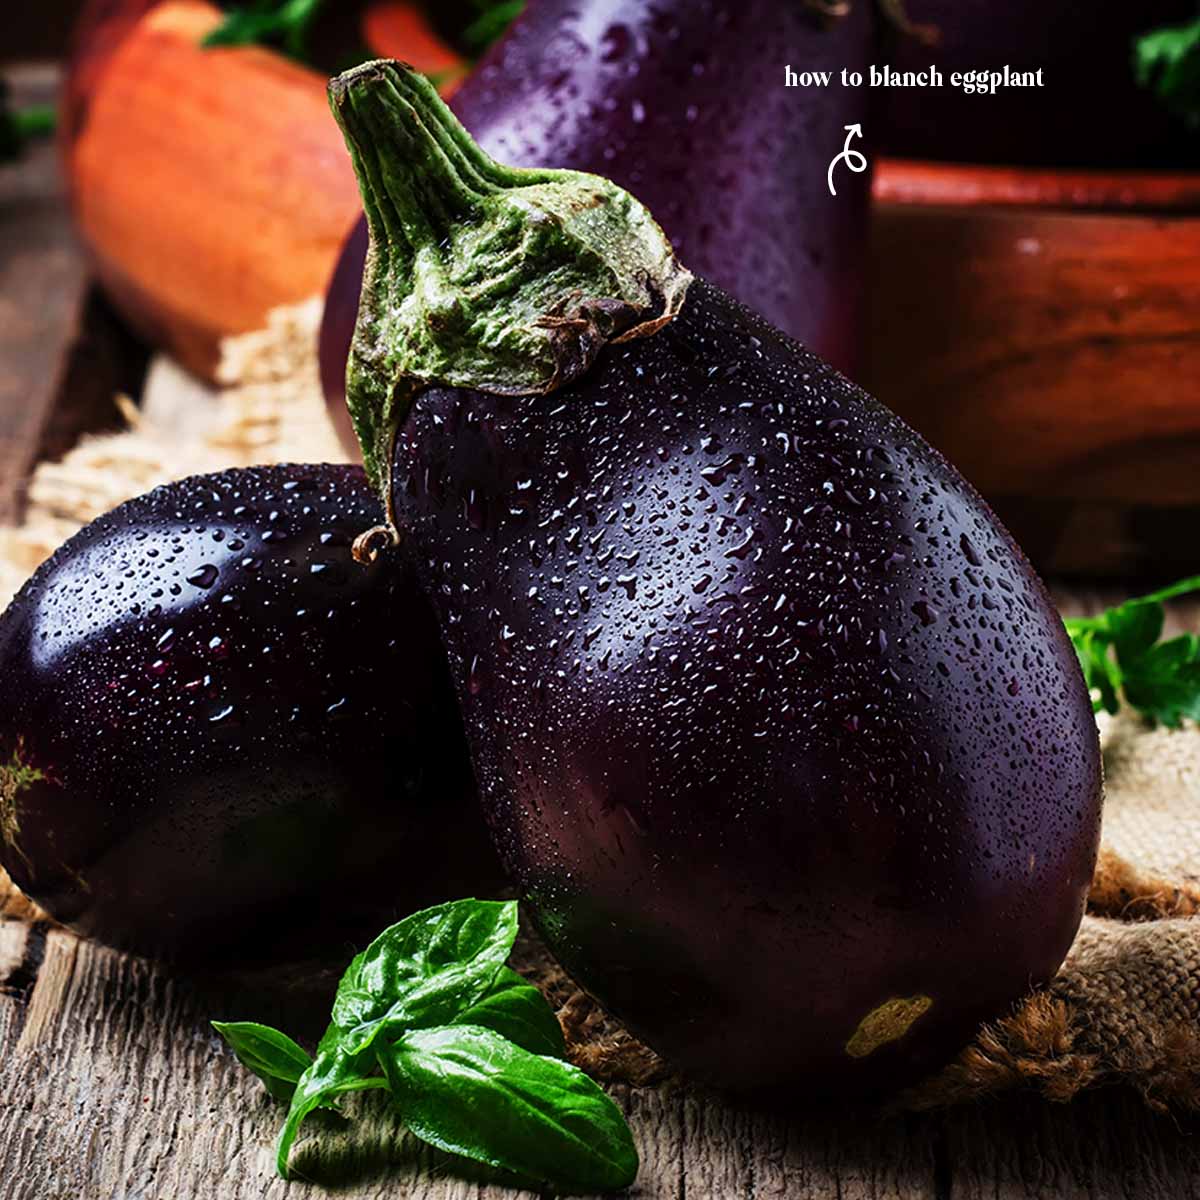 Here's the proper way on how to blanch eggplant to prevent bacteria to destroy the nutrients and change the color, flavor, and texture of food during frozen storage.